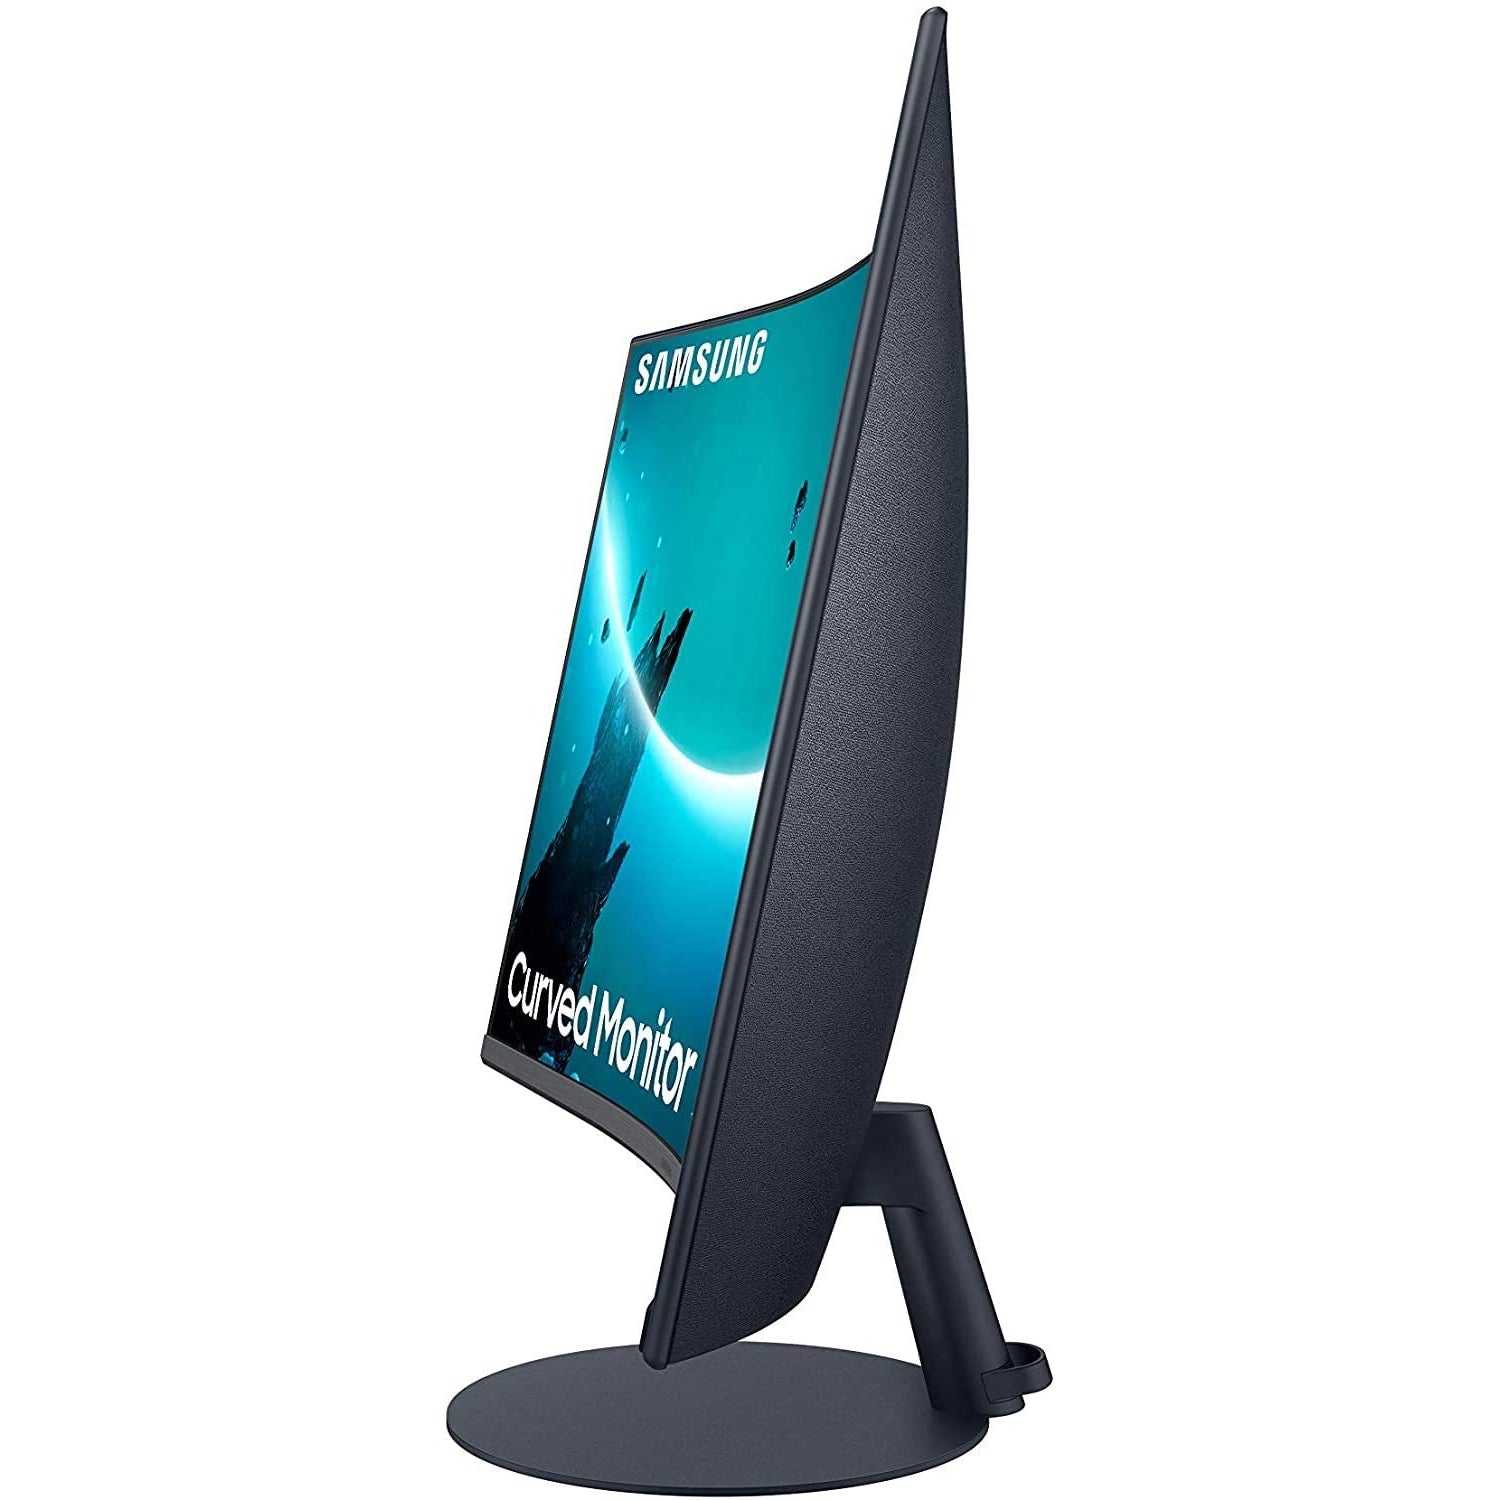 Samsung C32T550FDU 31.5" Full HD Curved LED Monitor 16:9 Response Time